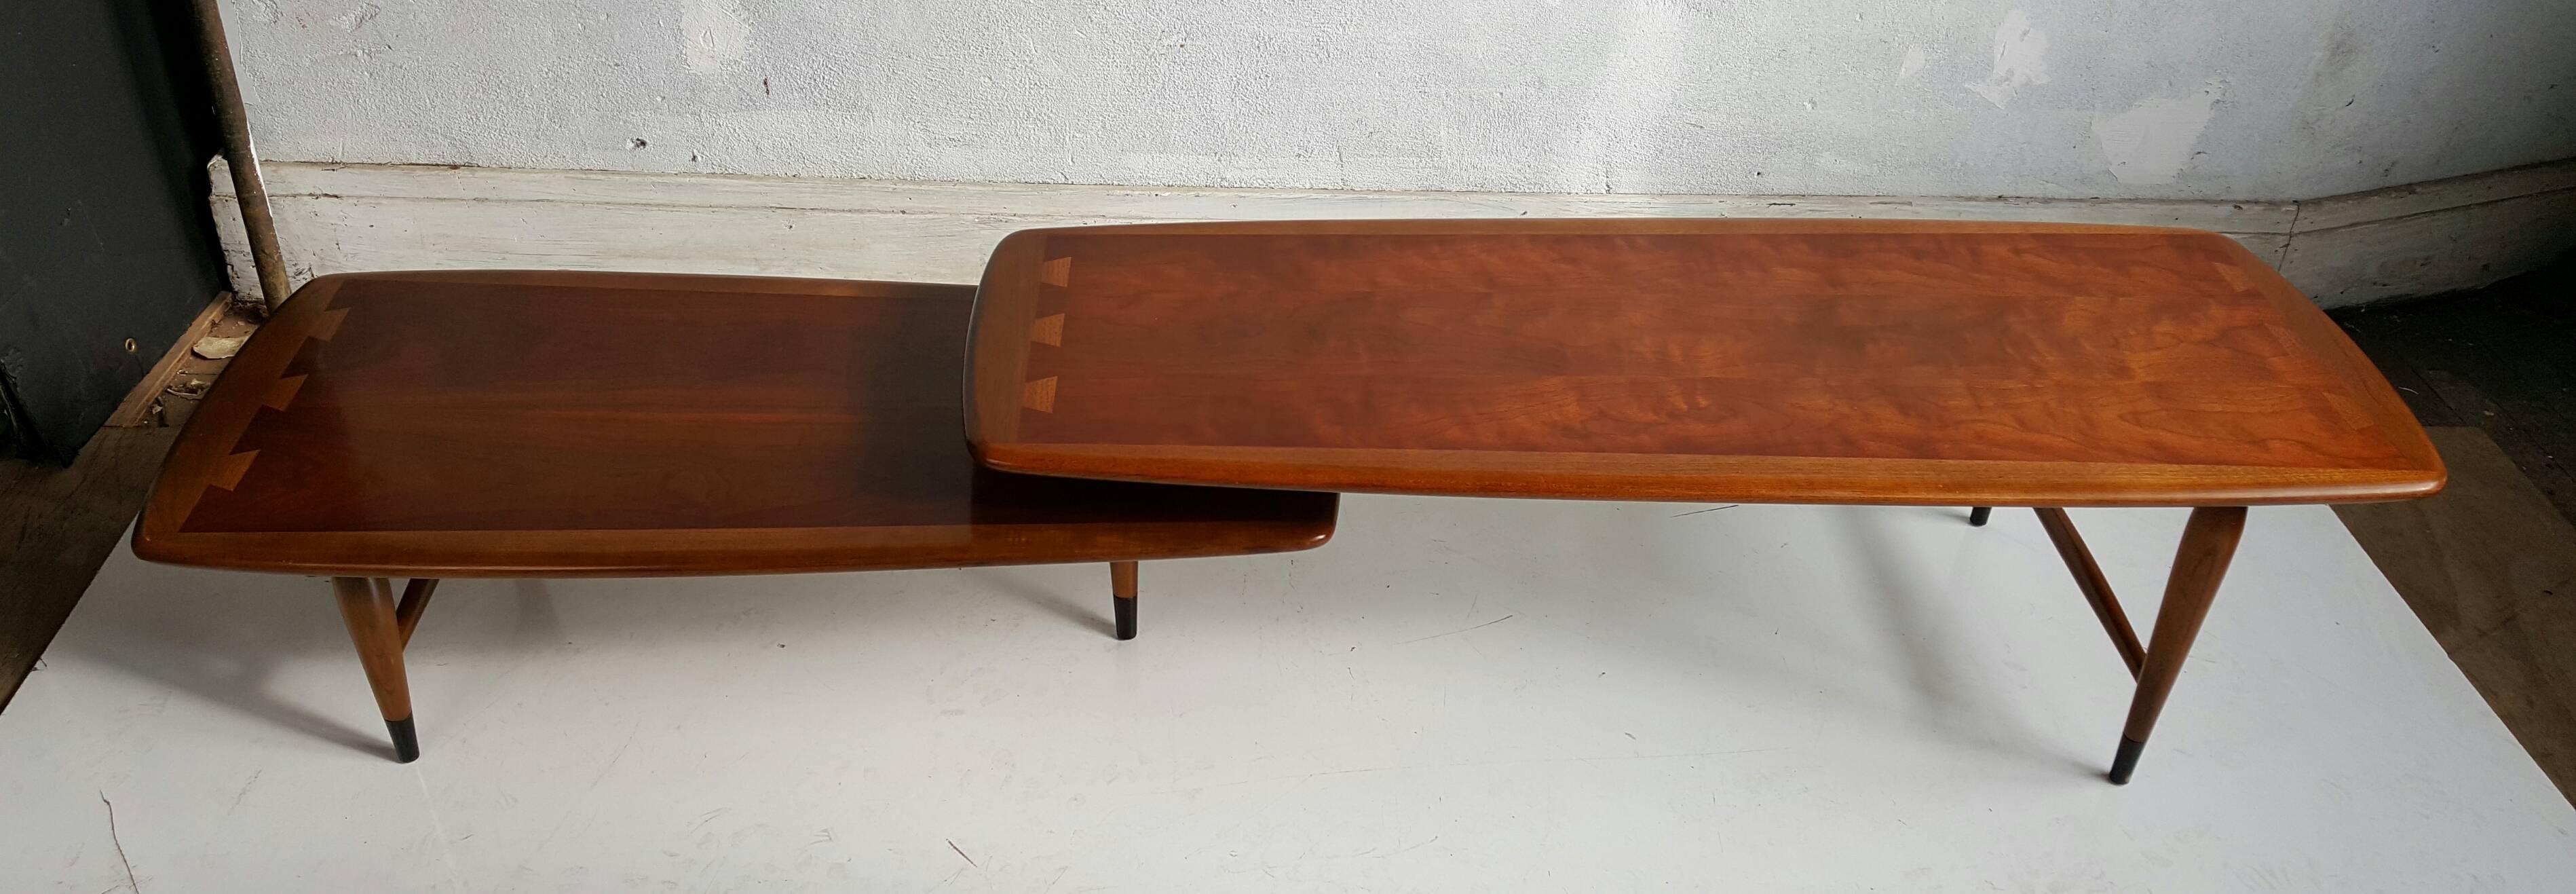 Classic Mid-Century Modern cocktail table manufactured by Lane Furniture Company from the 'Lane Acclaim' line, coined the 'Switchblade